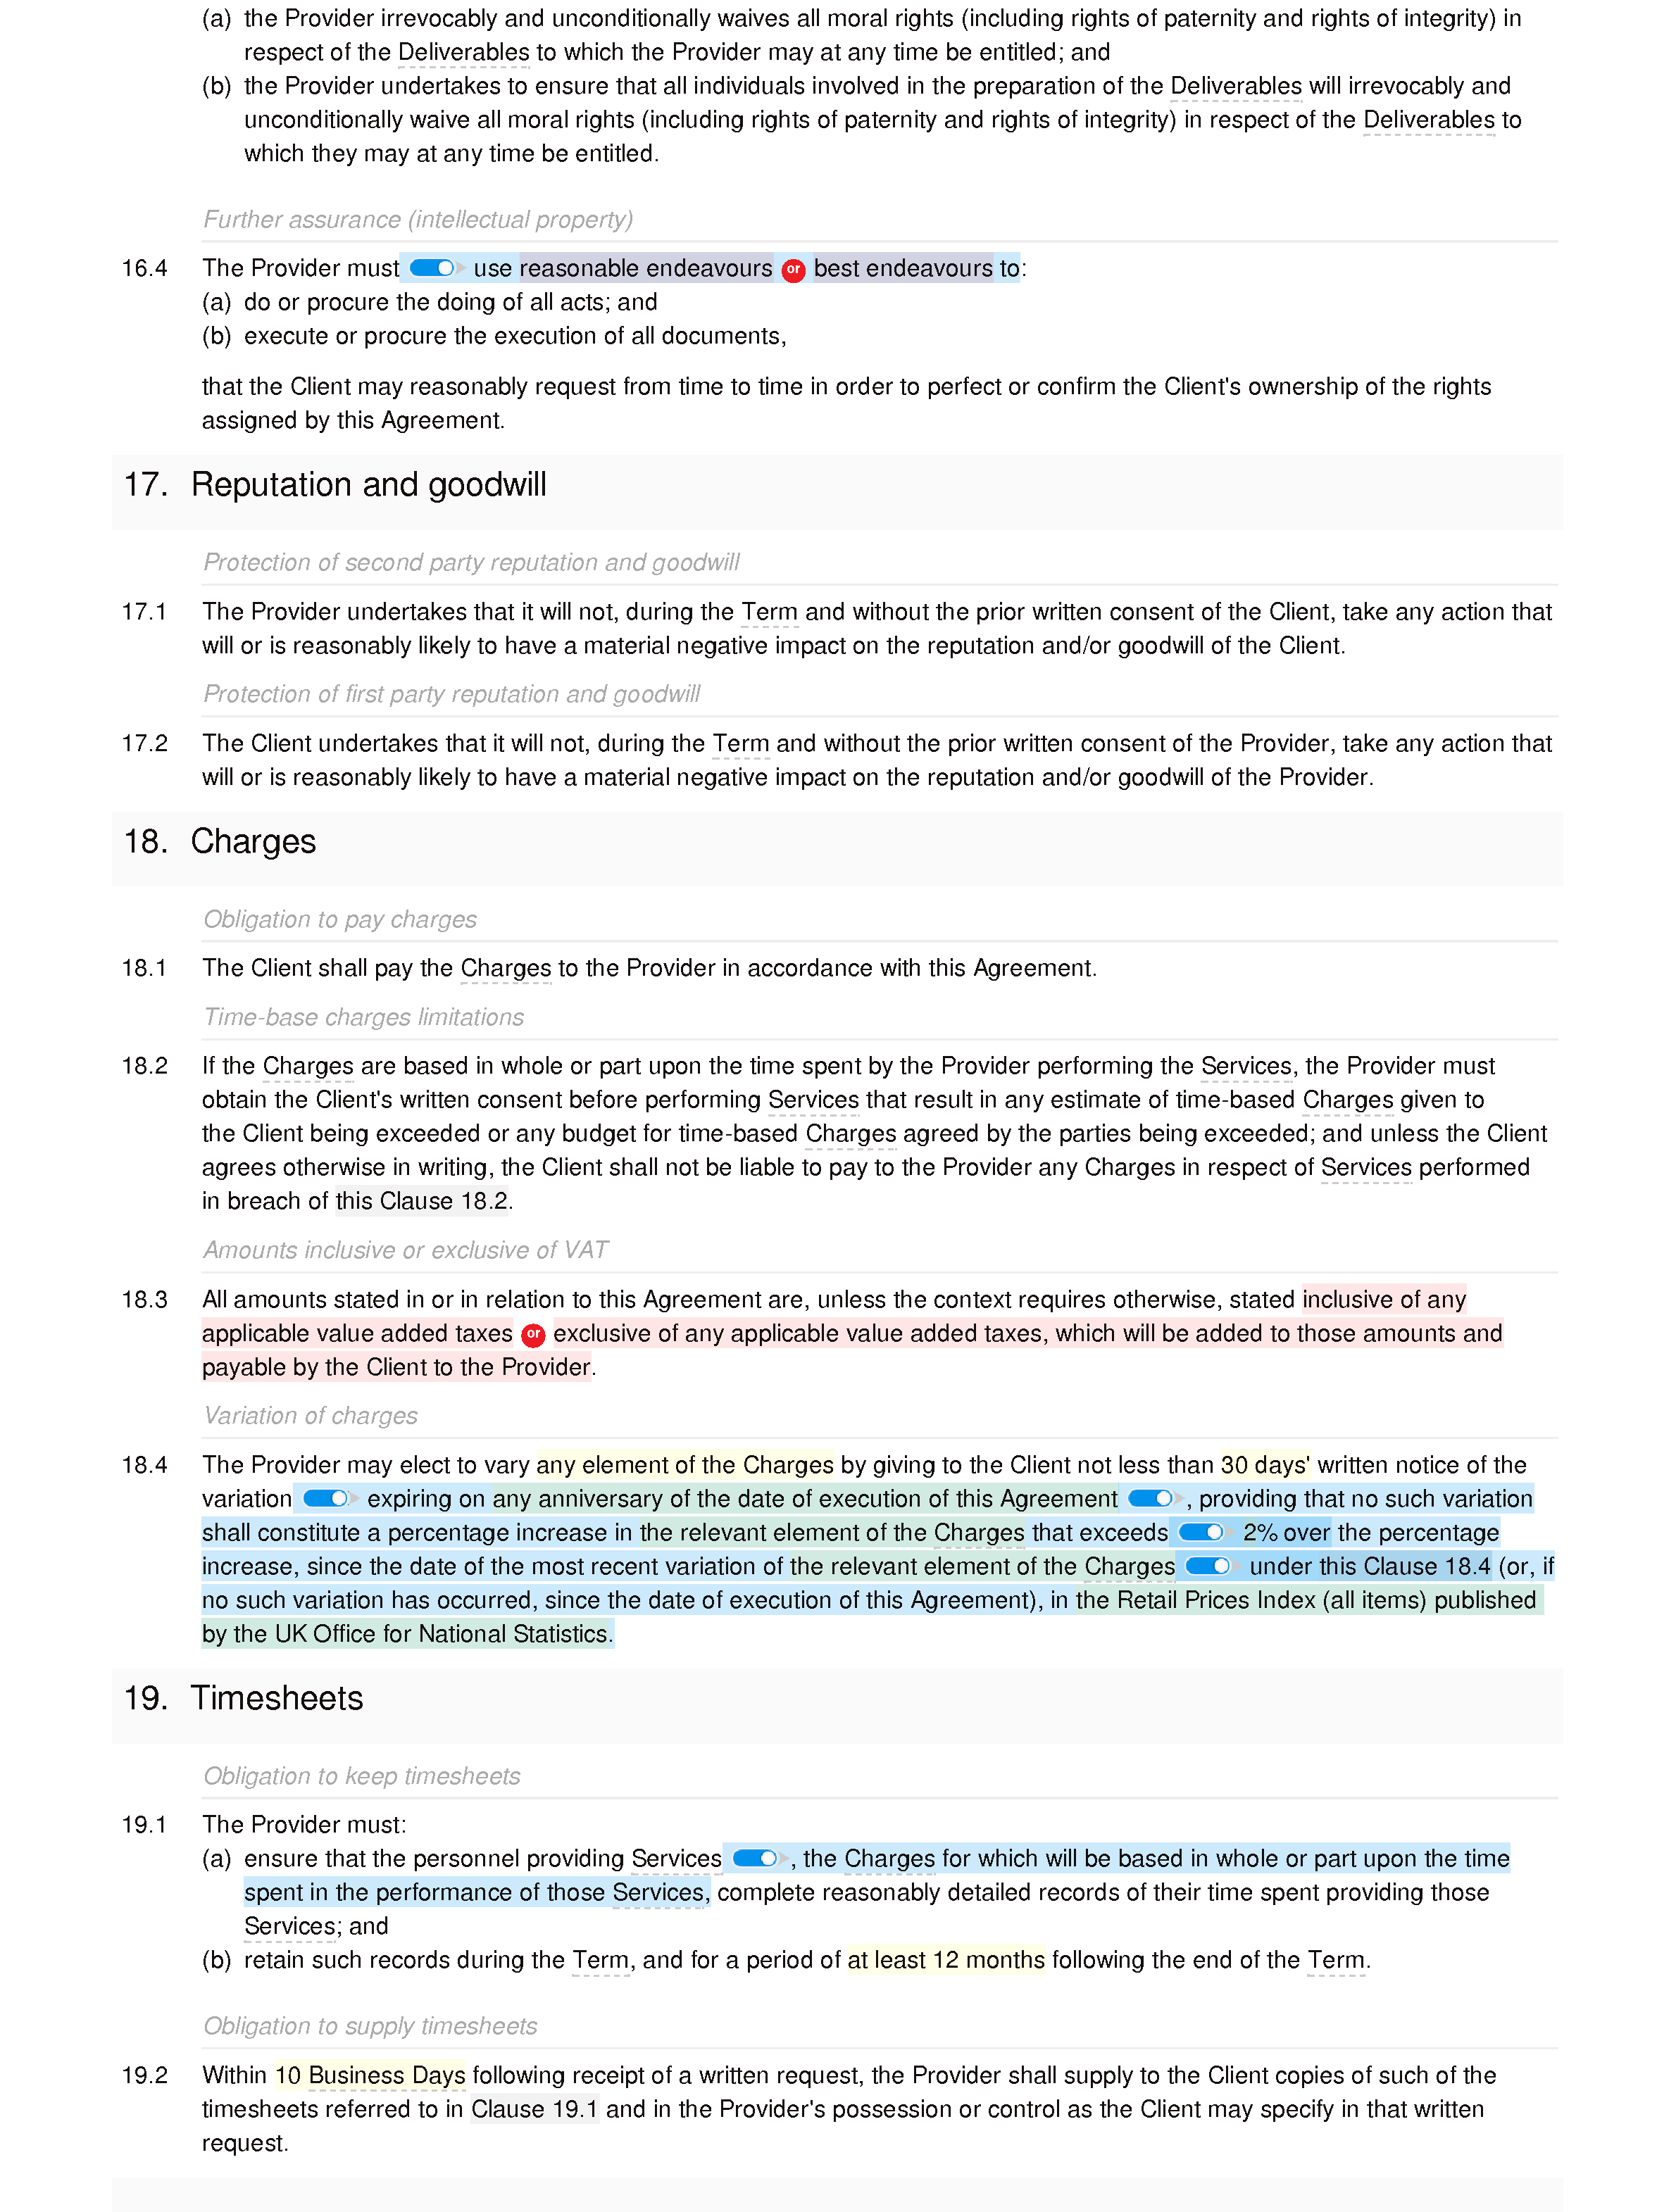 Web marketing agreement document editor preview